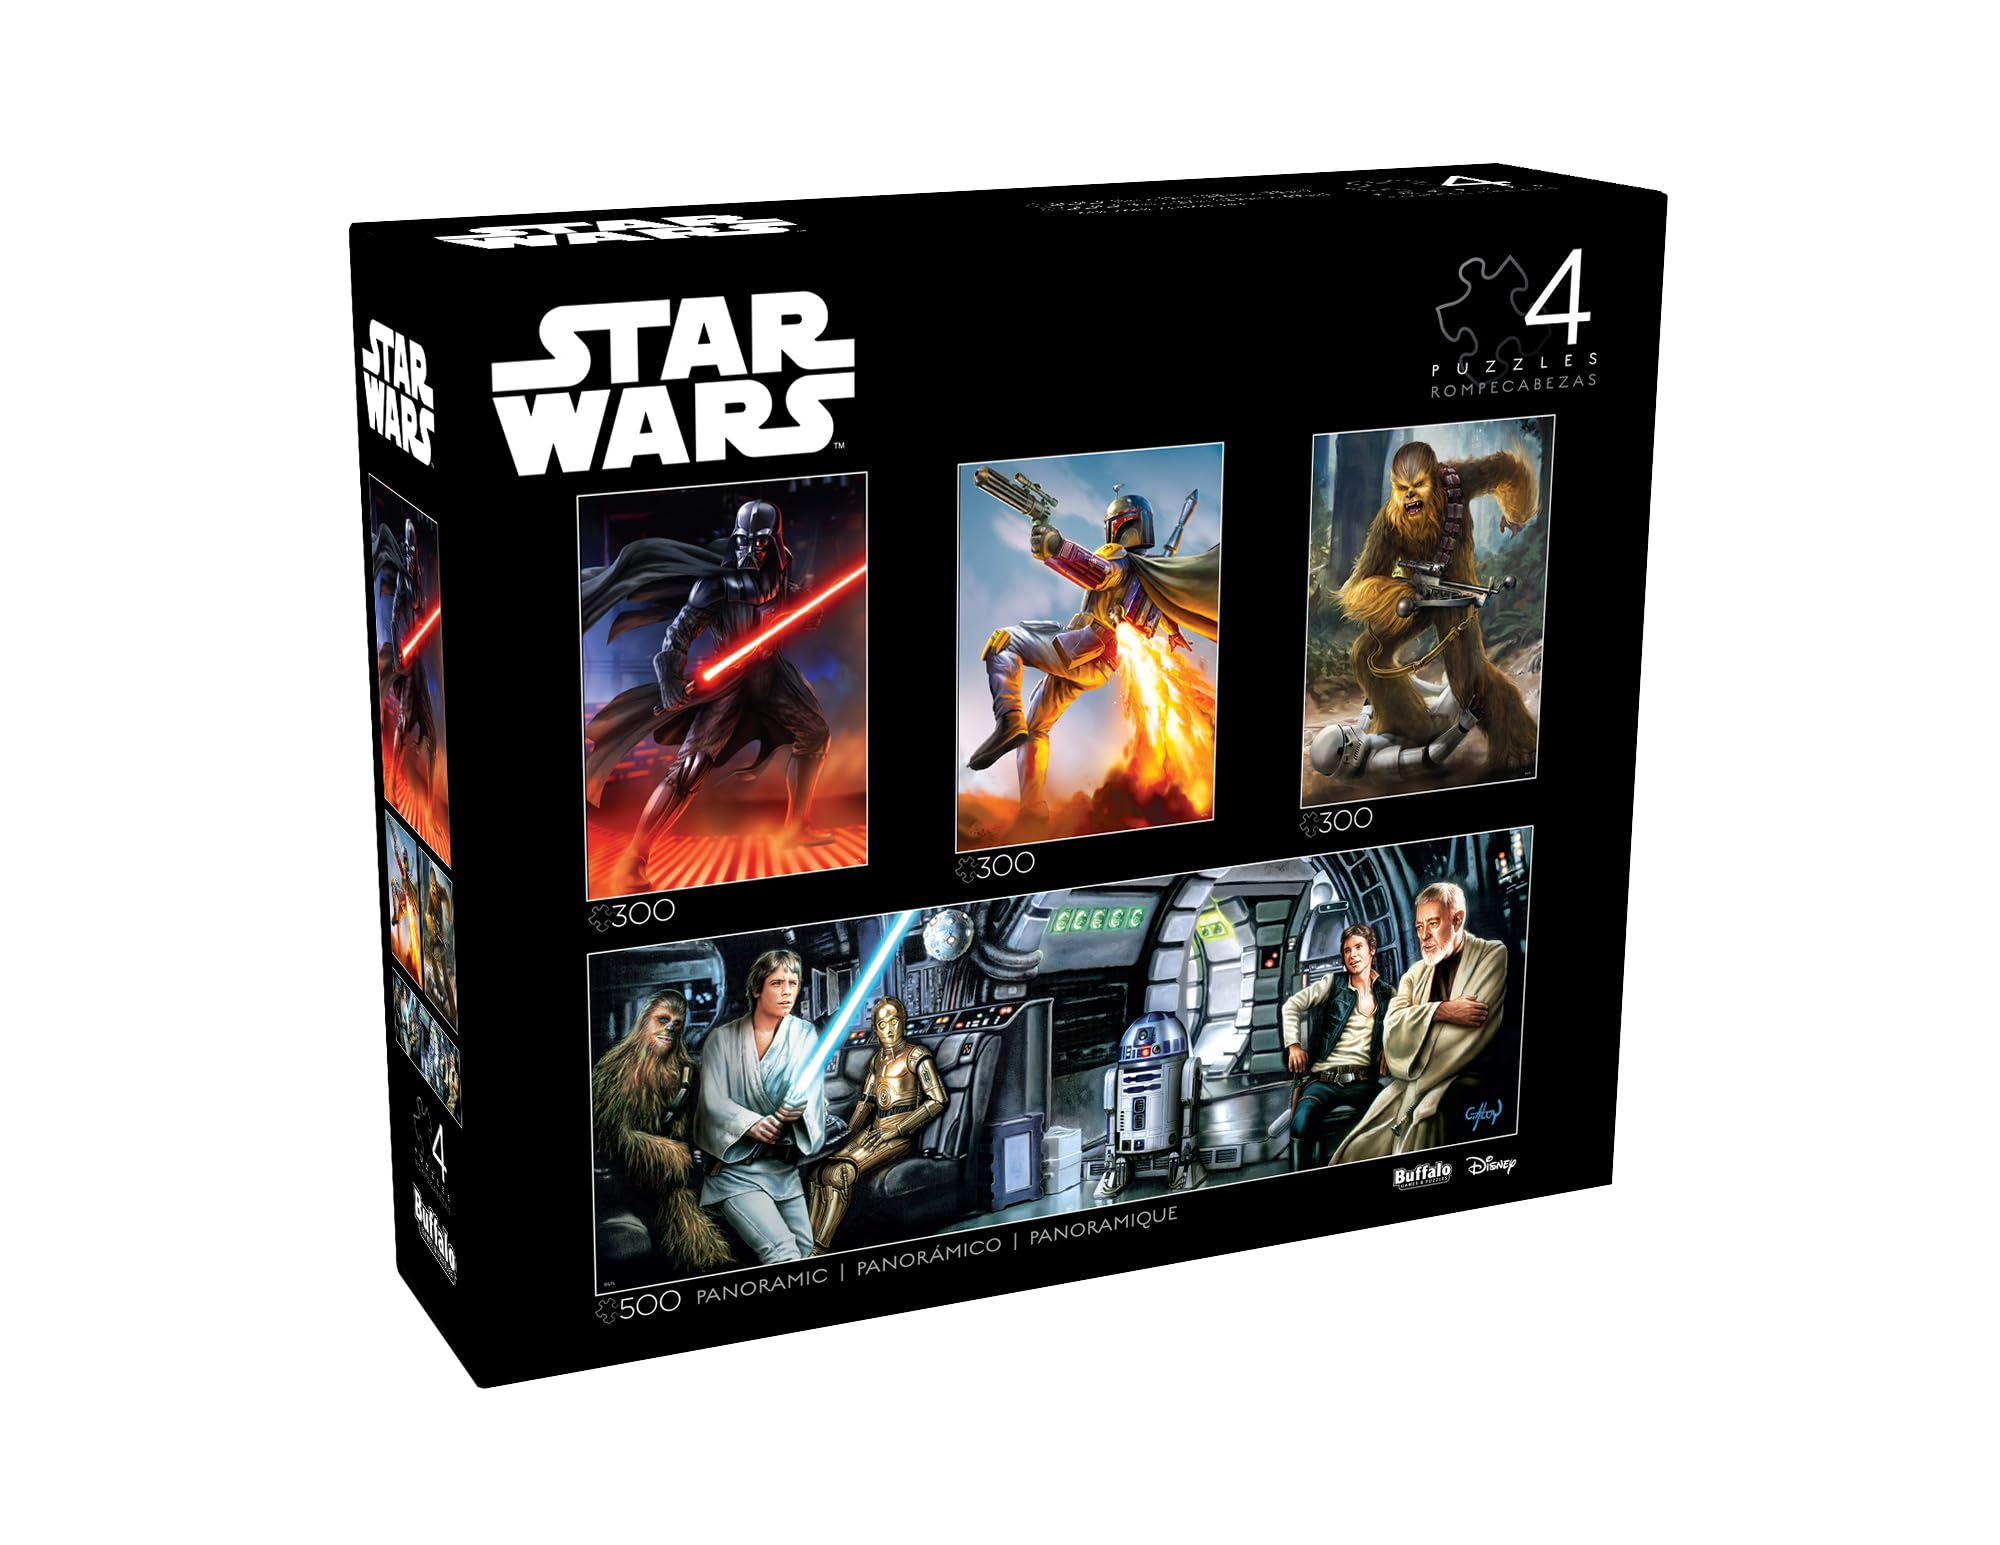 Buffalo Games - Star Wars - Classic Multipack for Adults Challenging Puzzle Perfect for Game Nights - Multipack Piece Finished Size is Varied